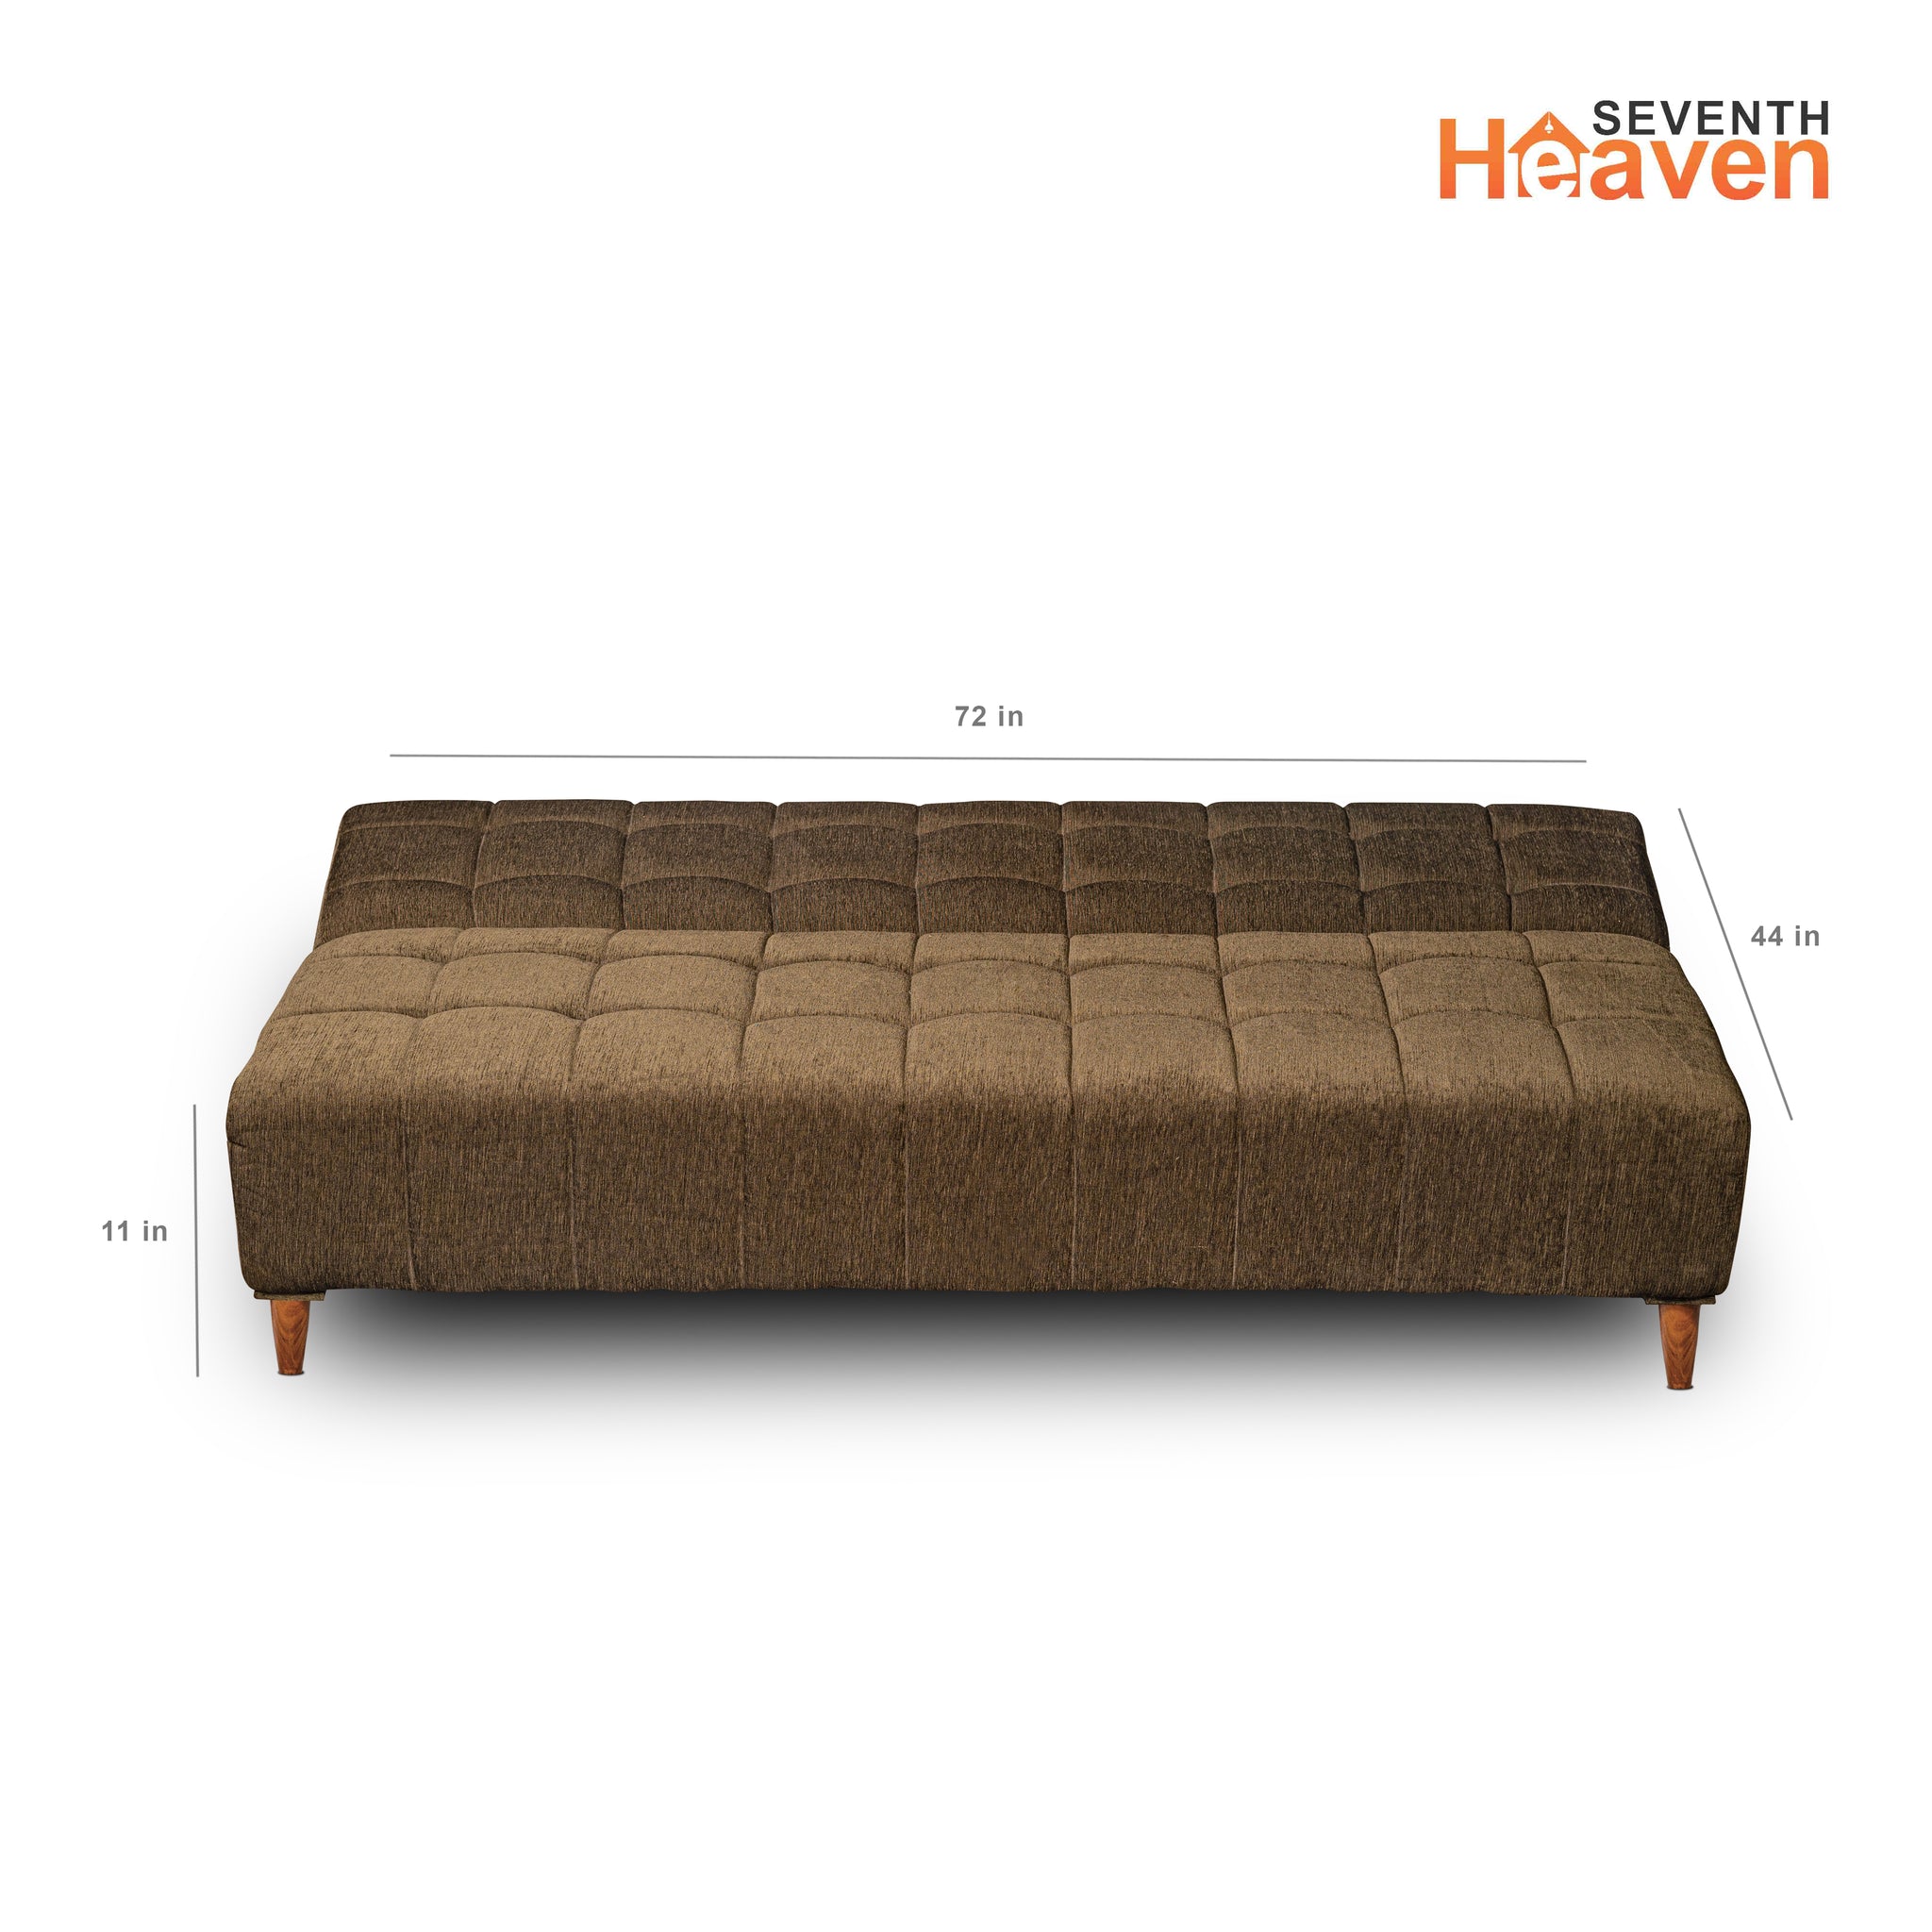 Seventh Heaven Lisbon 4 Seater Wooden Sofa Cum Bed with Armrest. Modern & Elegant Smart Furniture Range for luxurious homes, living rooms and offices. Use as a sofa, lounger or bed with removable armrest. Perfect for guests. Molphino fabric with sheesham polished wooden legs. Green colour.